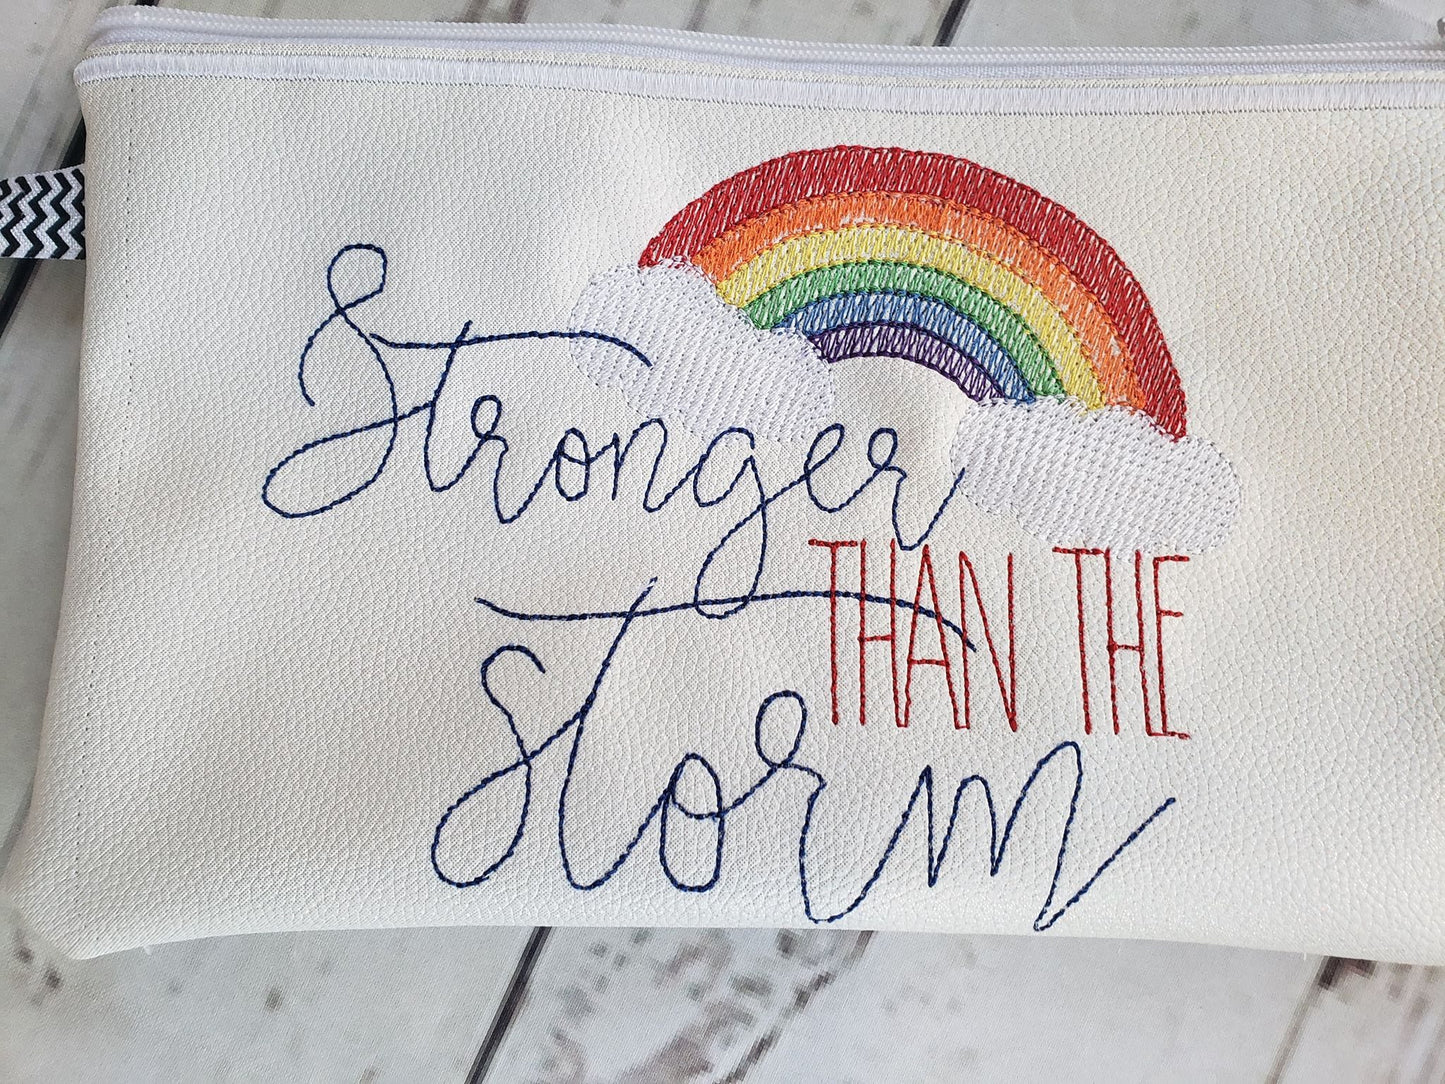 Stronger than the storm Zipper Bag - 3 sizes - Digital Embroidery Design